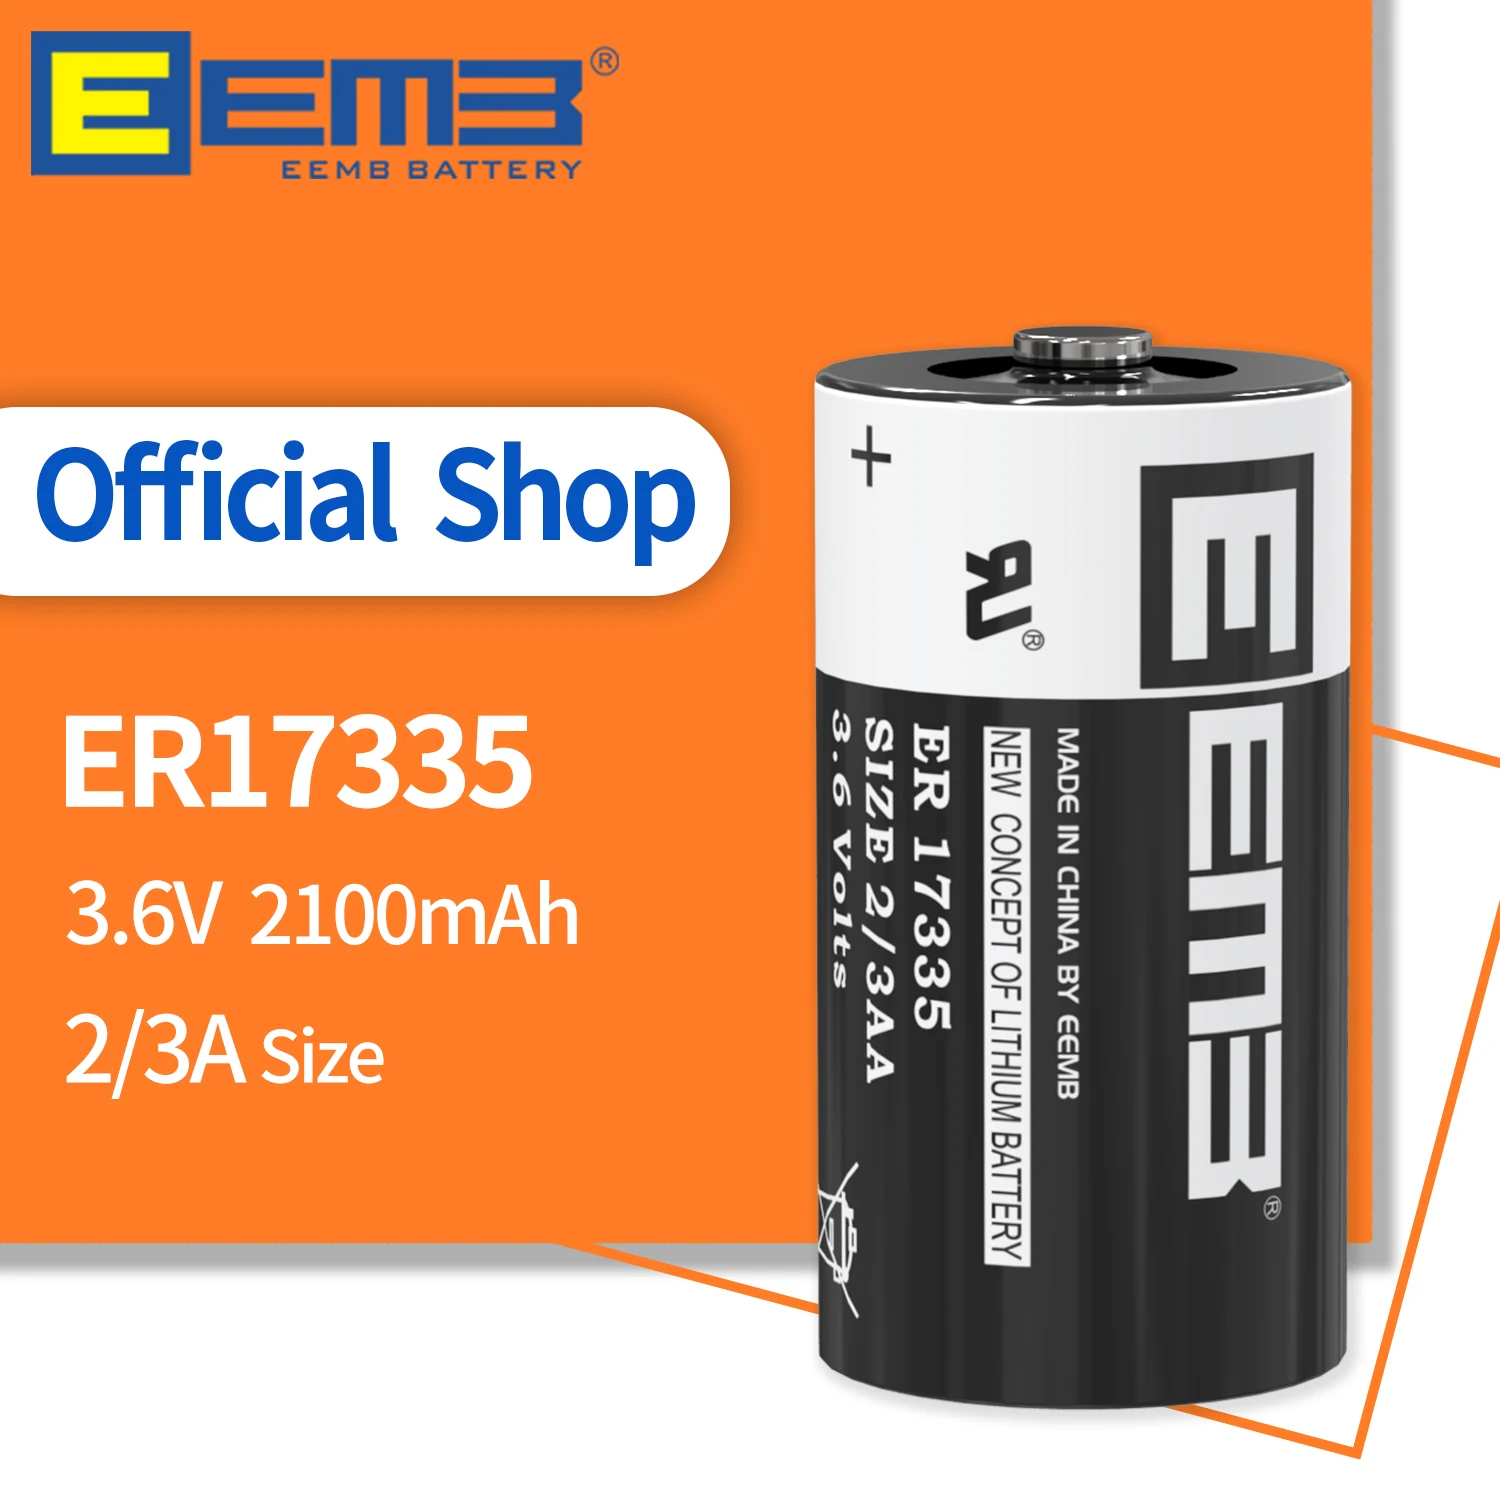 

EEMB 2/3A 3.6V Lithium Battery ER17335 Batteries 2100mAh Non-Rechargeable Battery for GPS Monitor Water/Gas Meter Alarm System